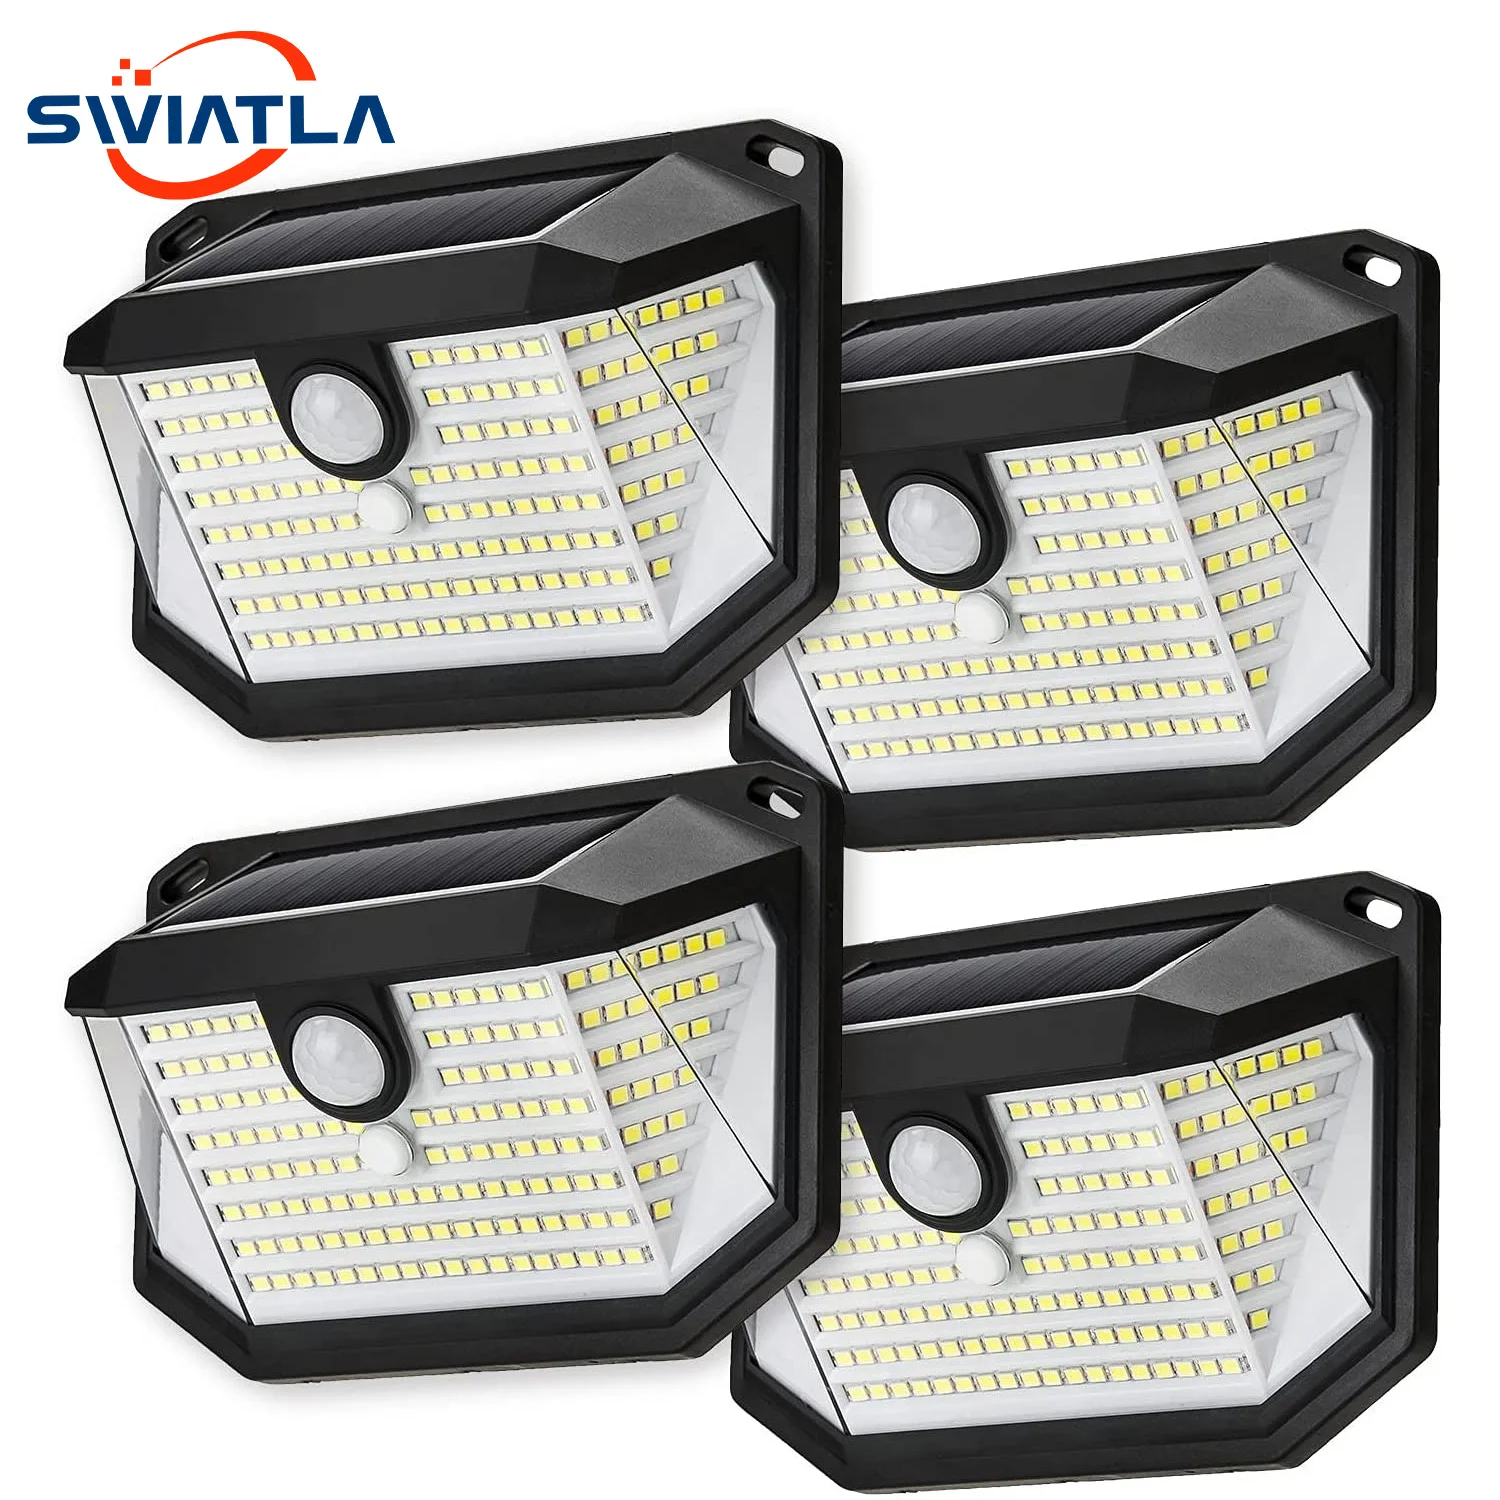 Swiatla Solar Motion Outdoor Lights178 LED with 270° Wide Angle IP65 Waterproof Dusk To Dawn Security Lights for Garden Patio solar deck lights